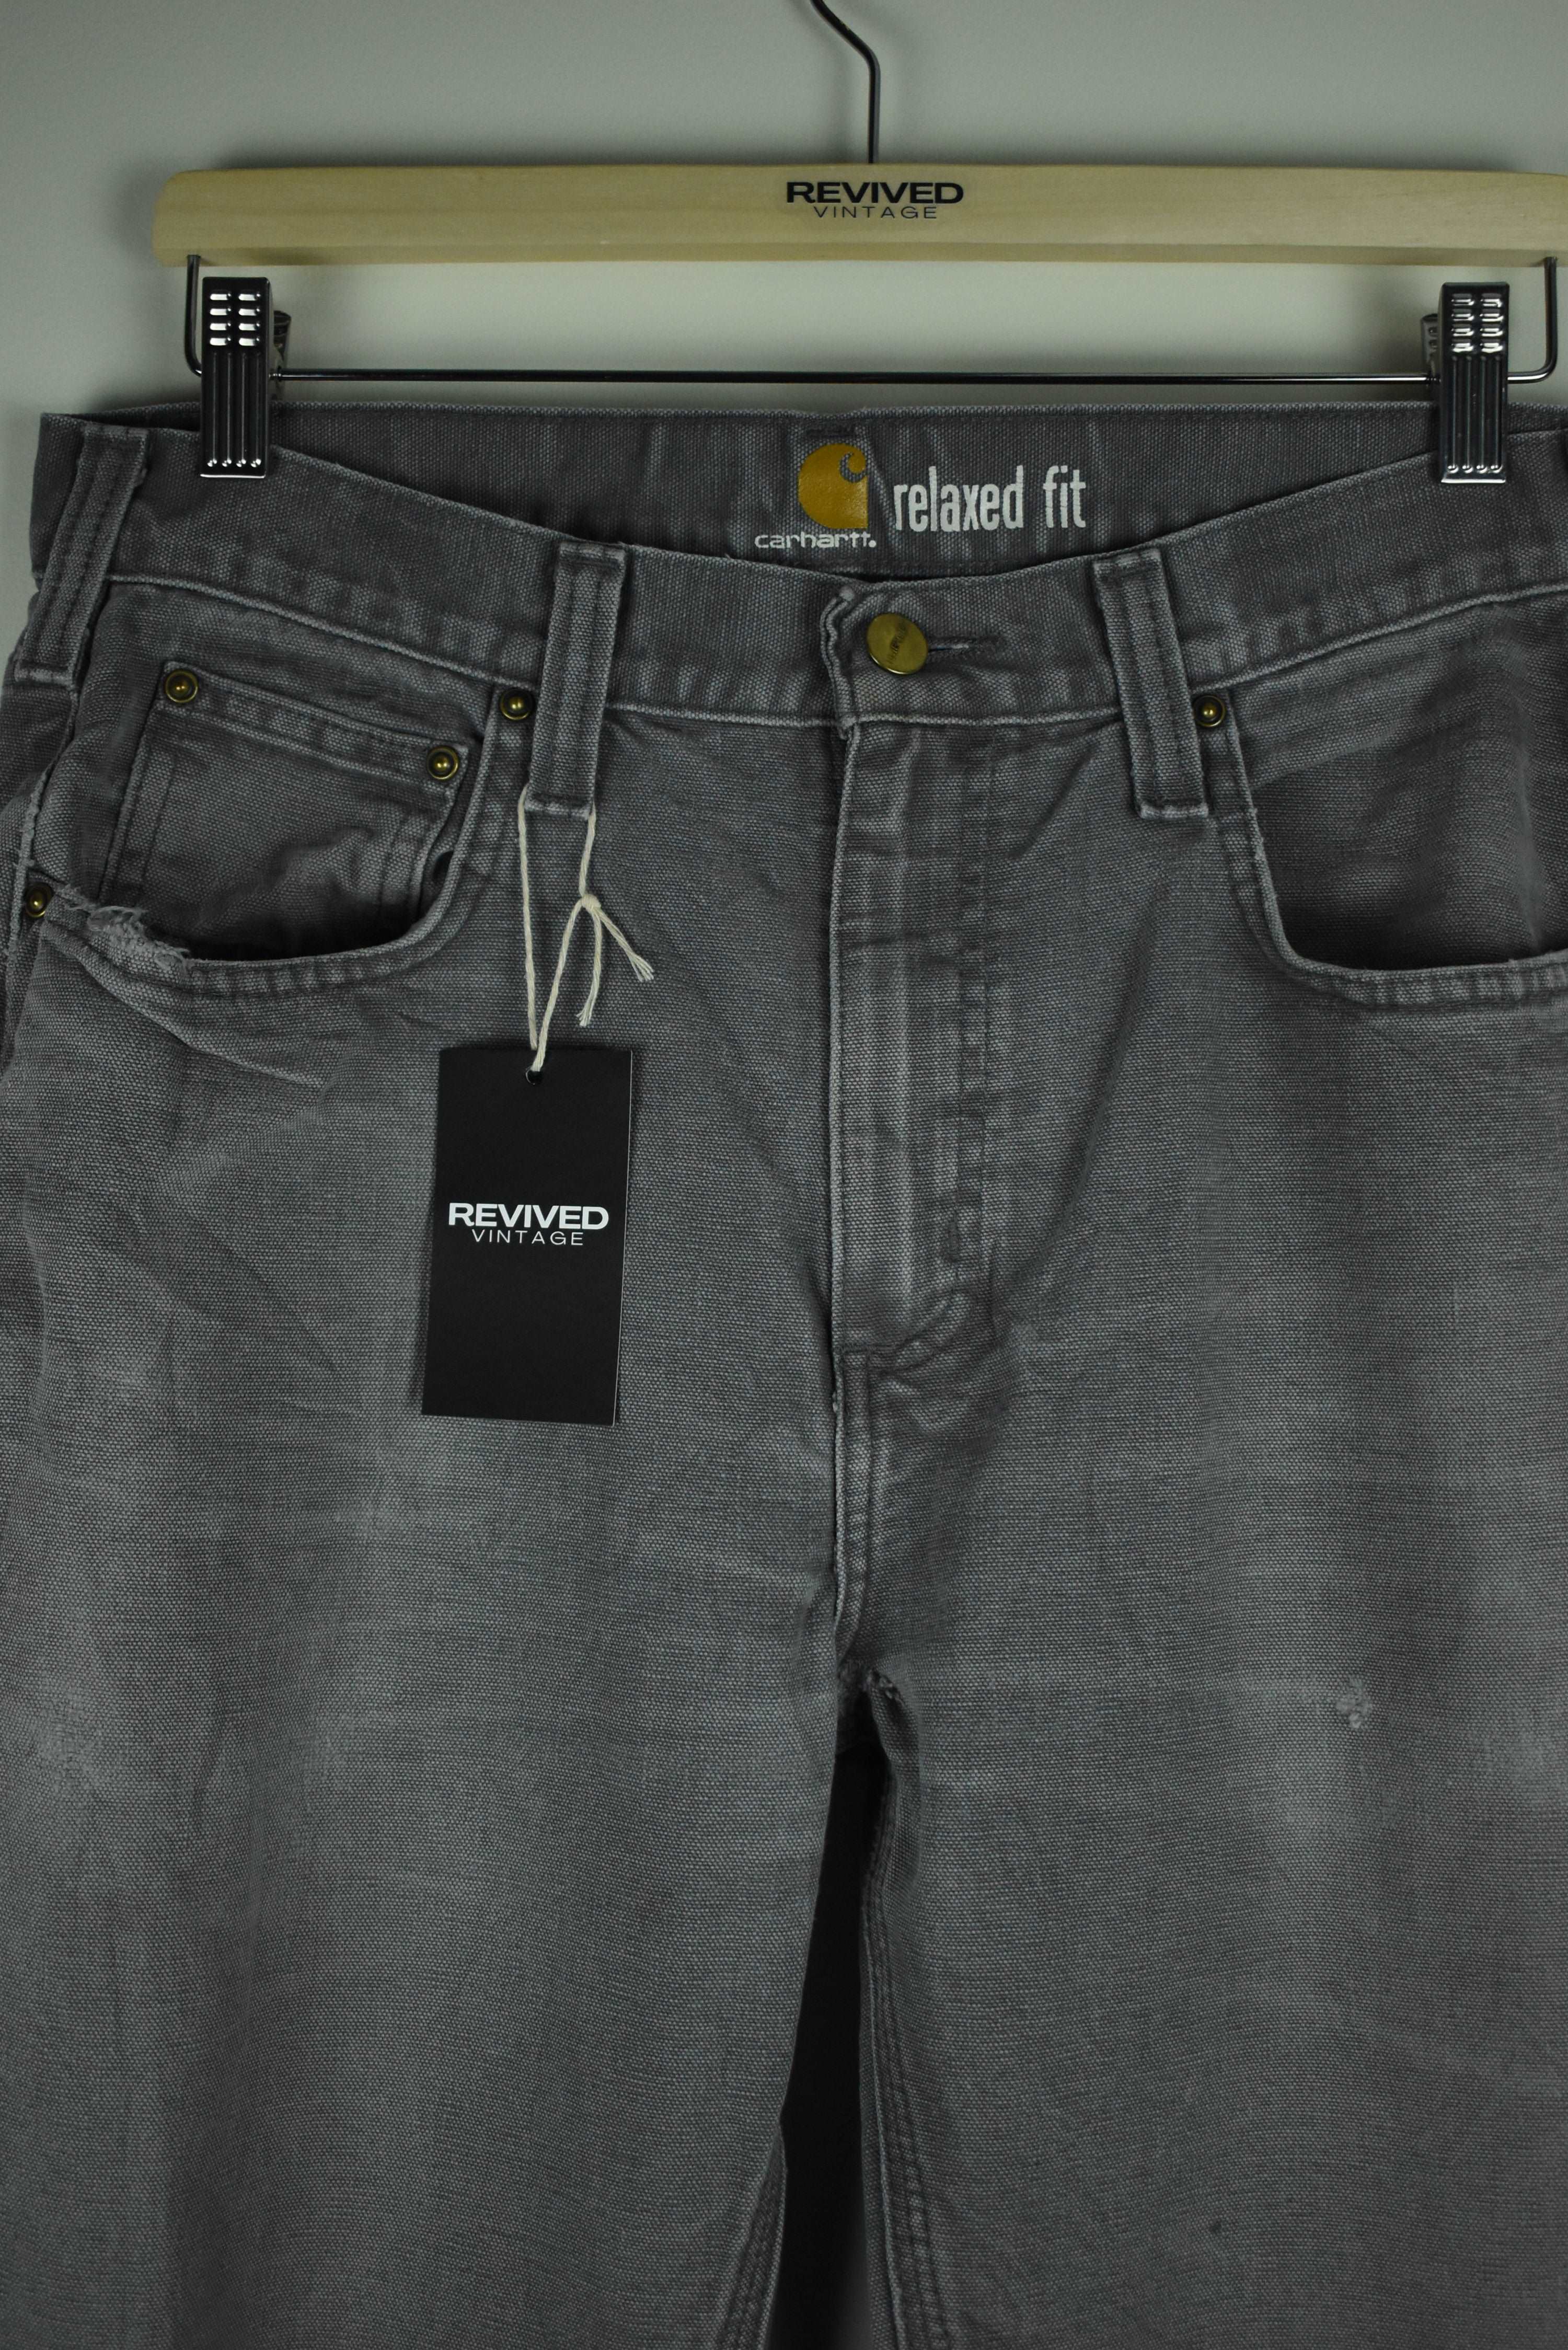 Vintage Carhartt Classic Pants Relaxed Fit 31 x 34